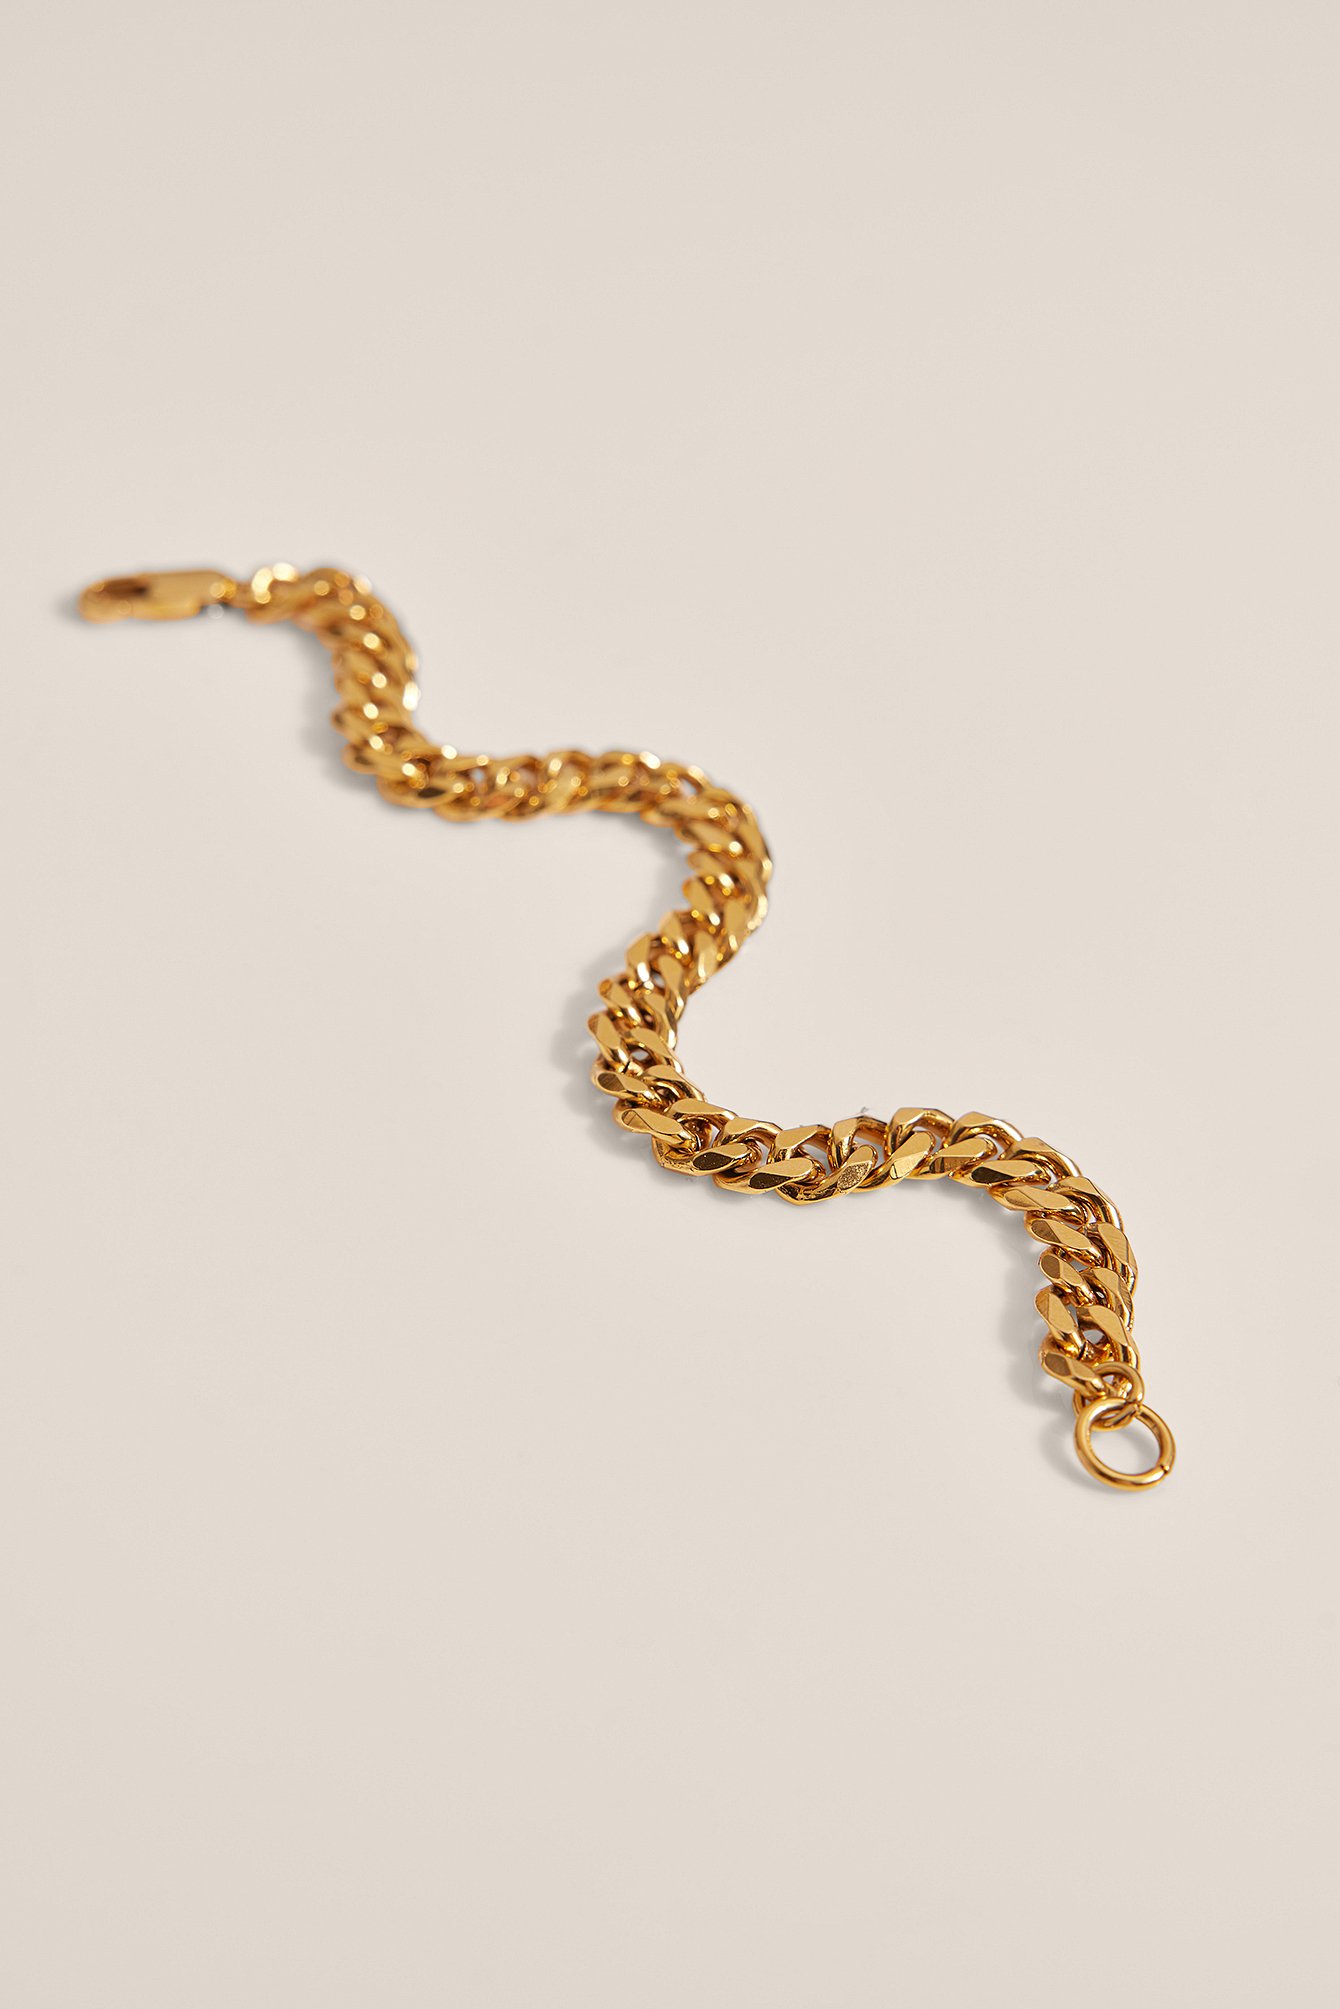 Gold Gold Plated Chubby Chain Bracelet